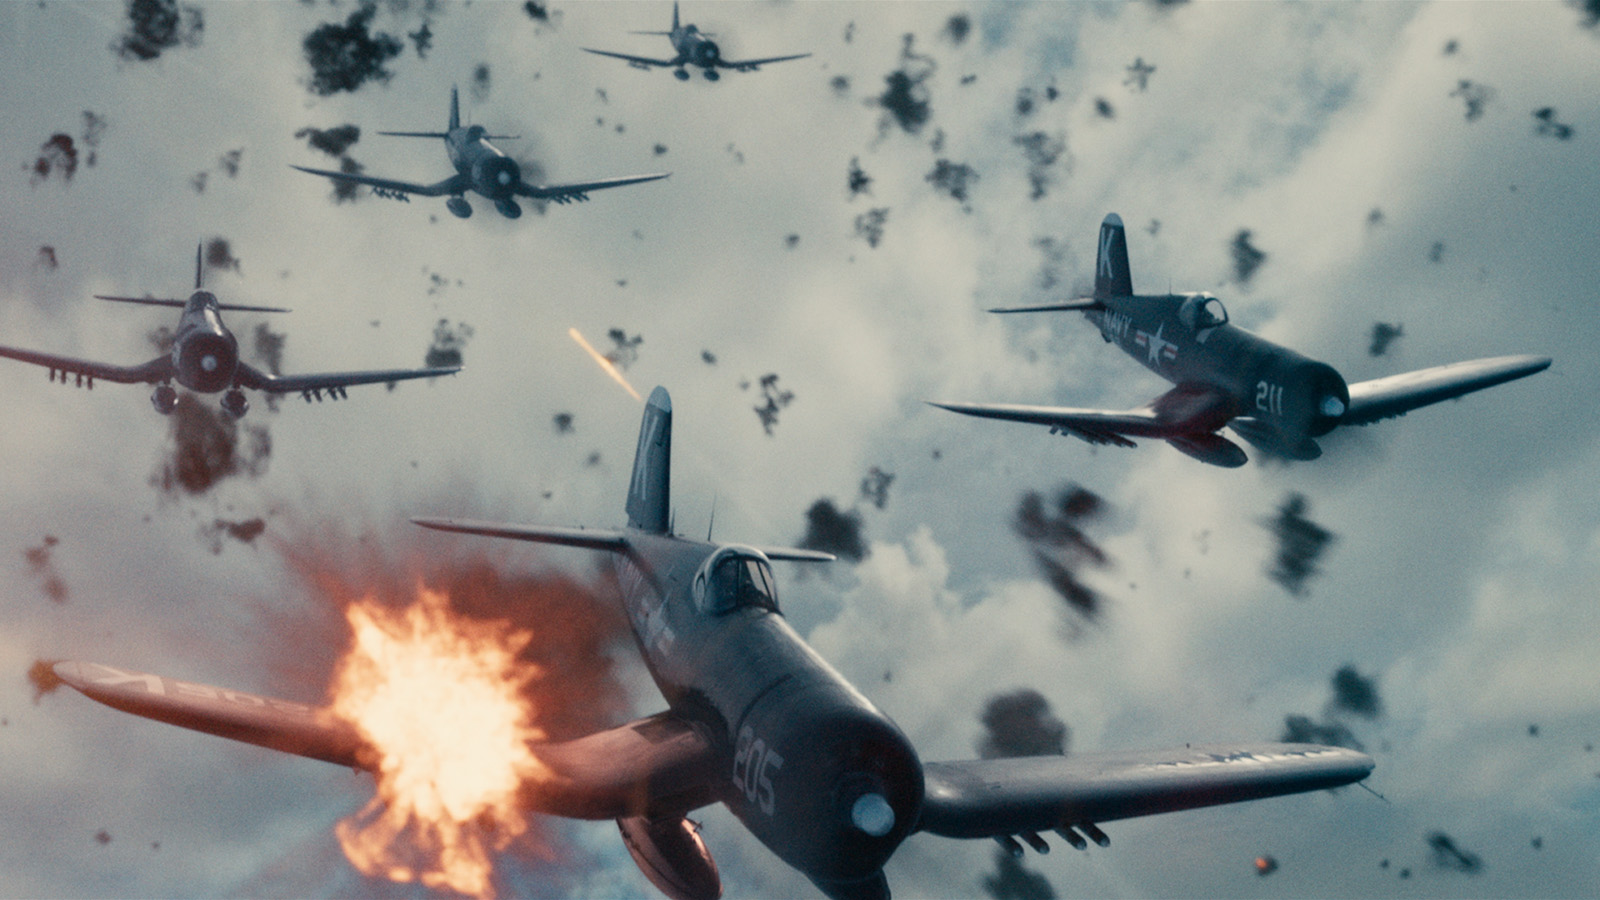 Visual effects used to create dive-bombing sequence 